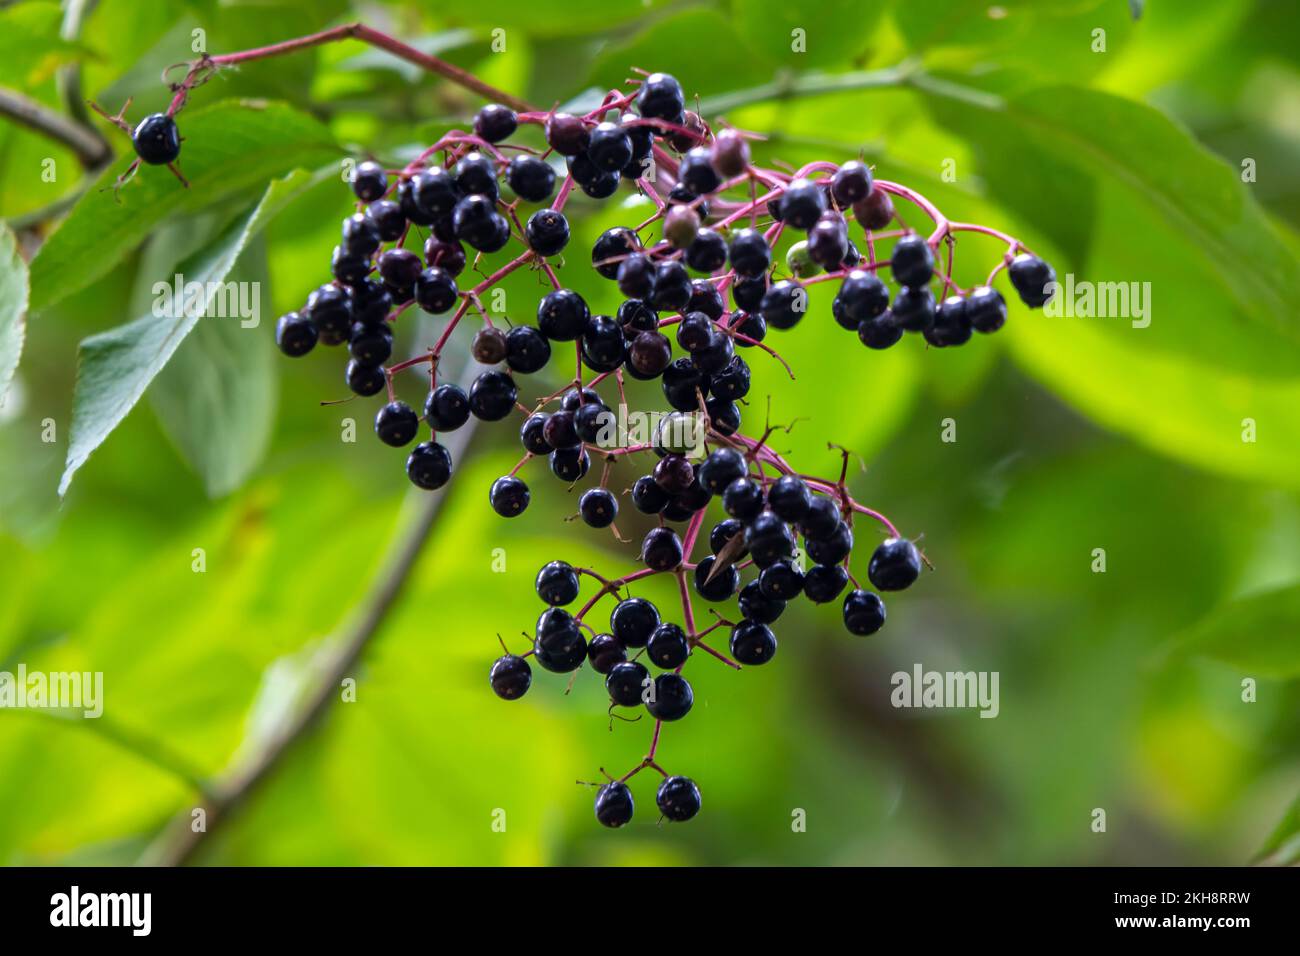 Ripe elderberries hanging from a tree Stock Photo